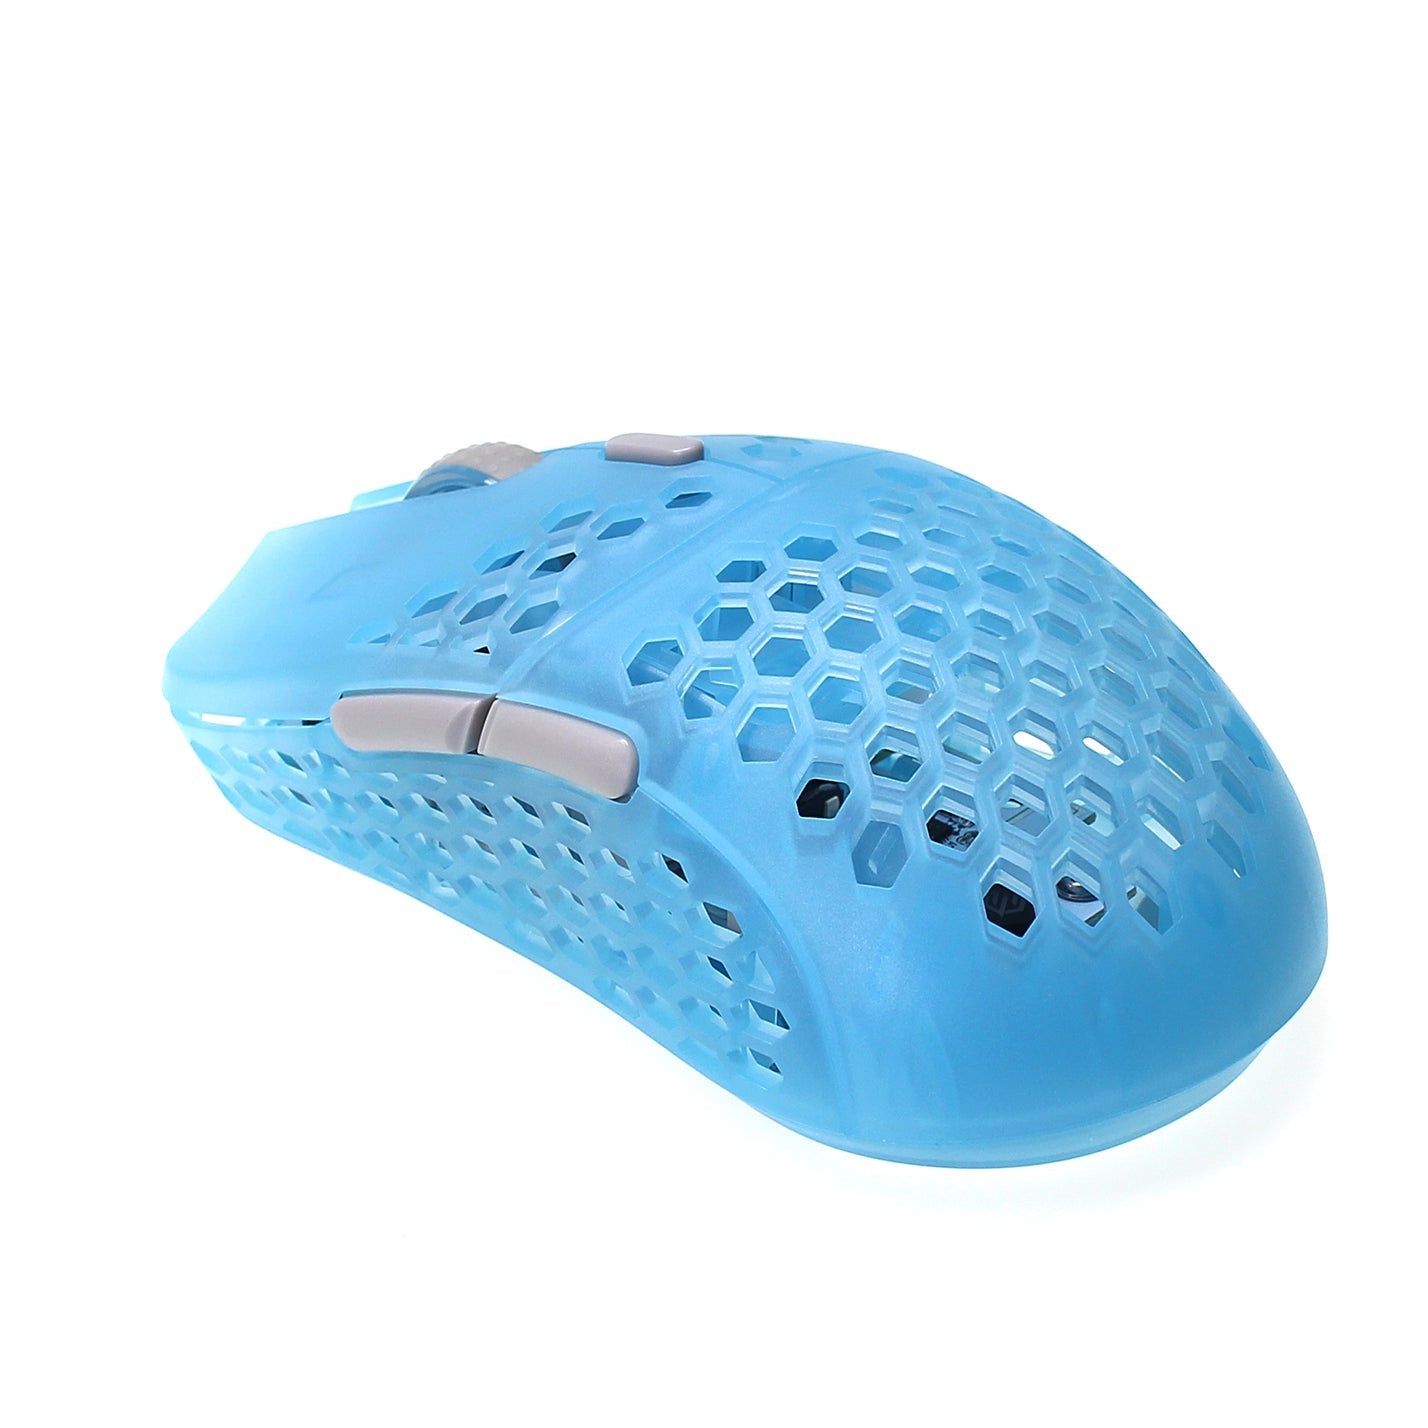 G-wolves Hati Small HTS Transparent Blue Wireless Gaming Mouse-Addice Inc